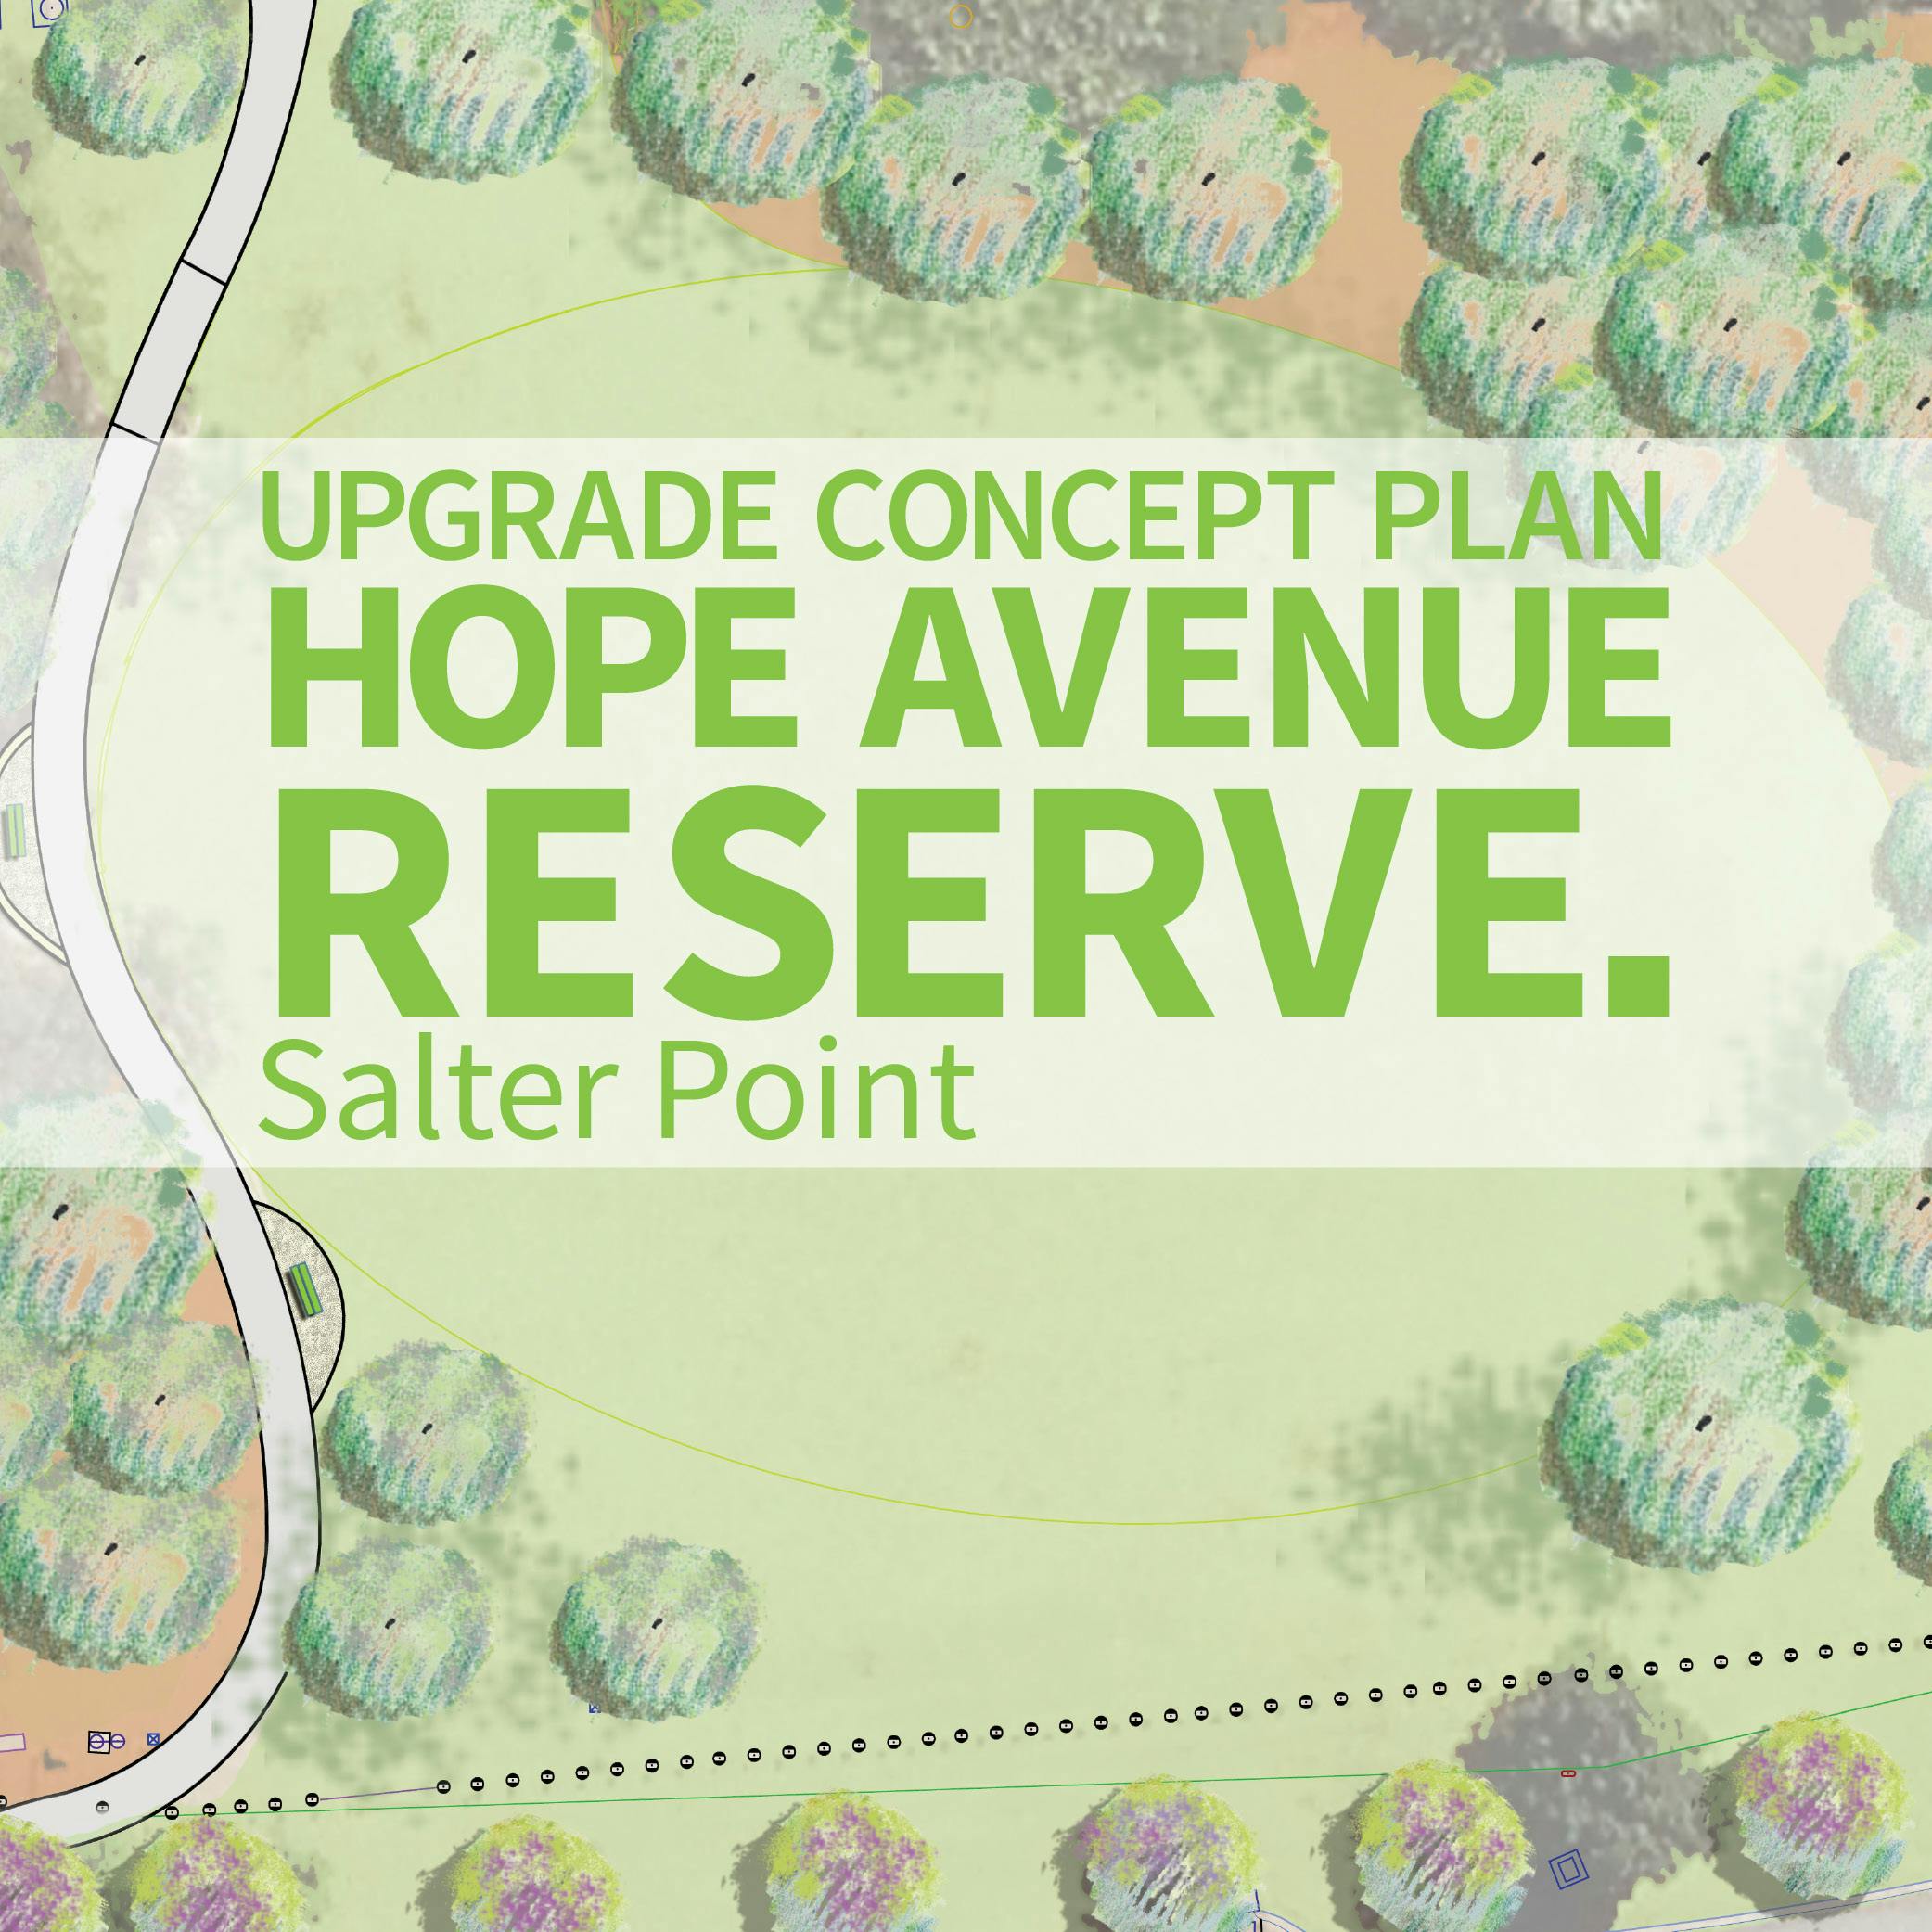 Hope Ave Reserve upgrade